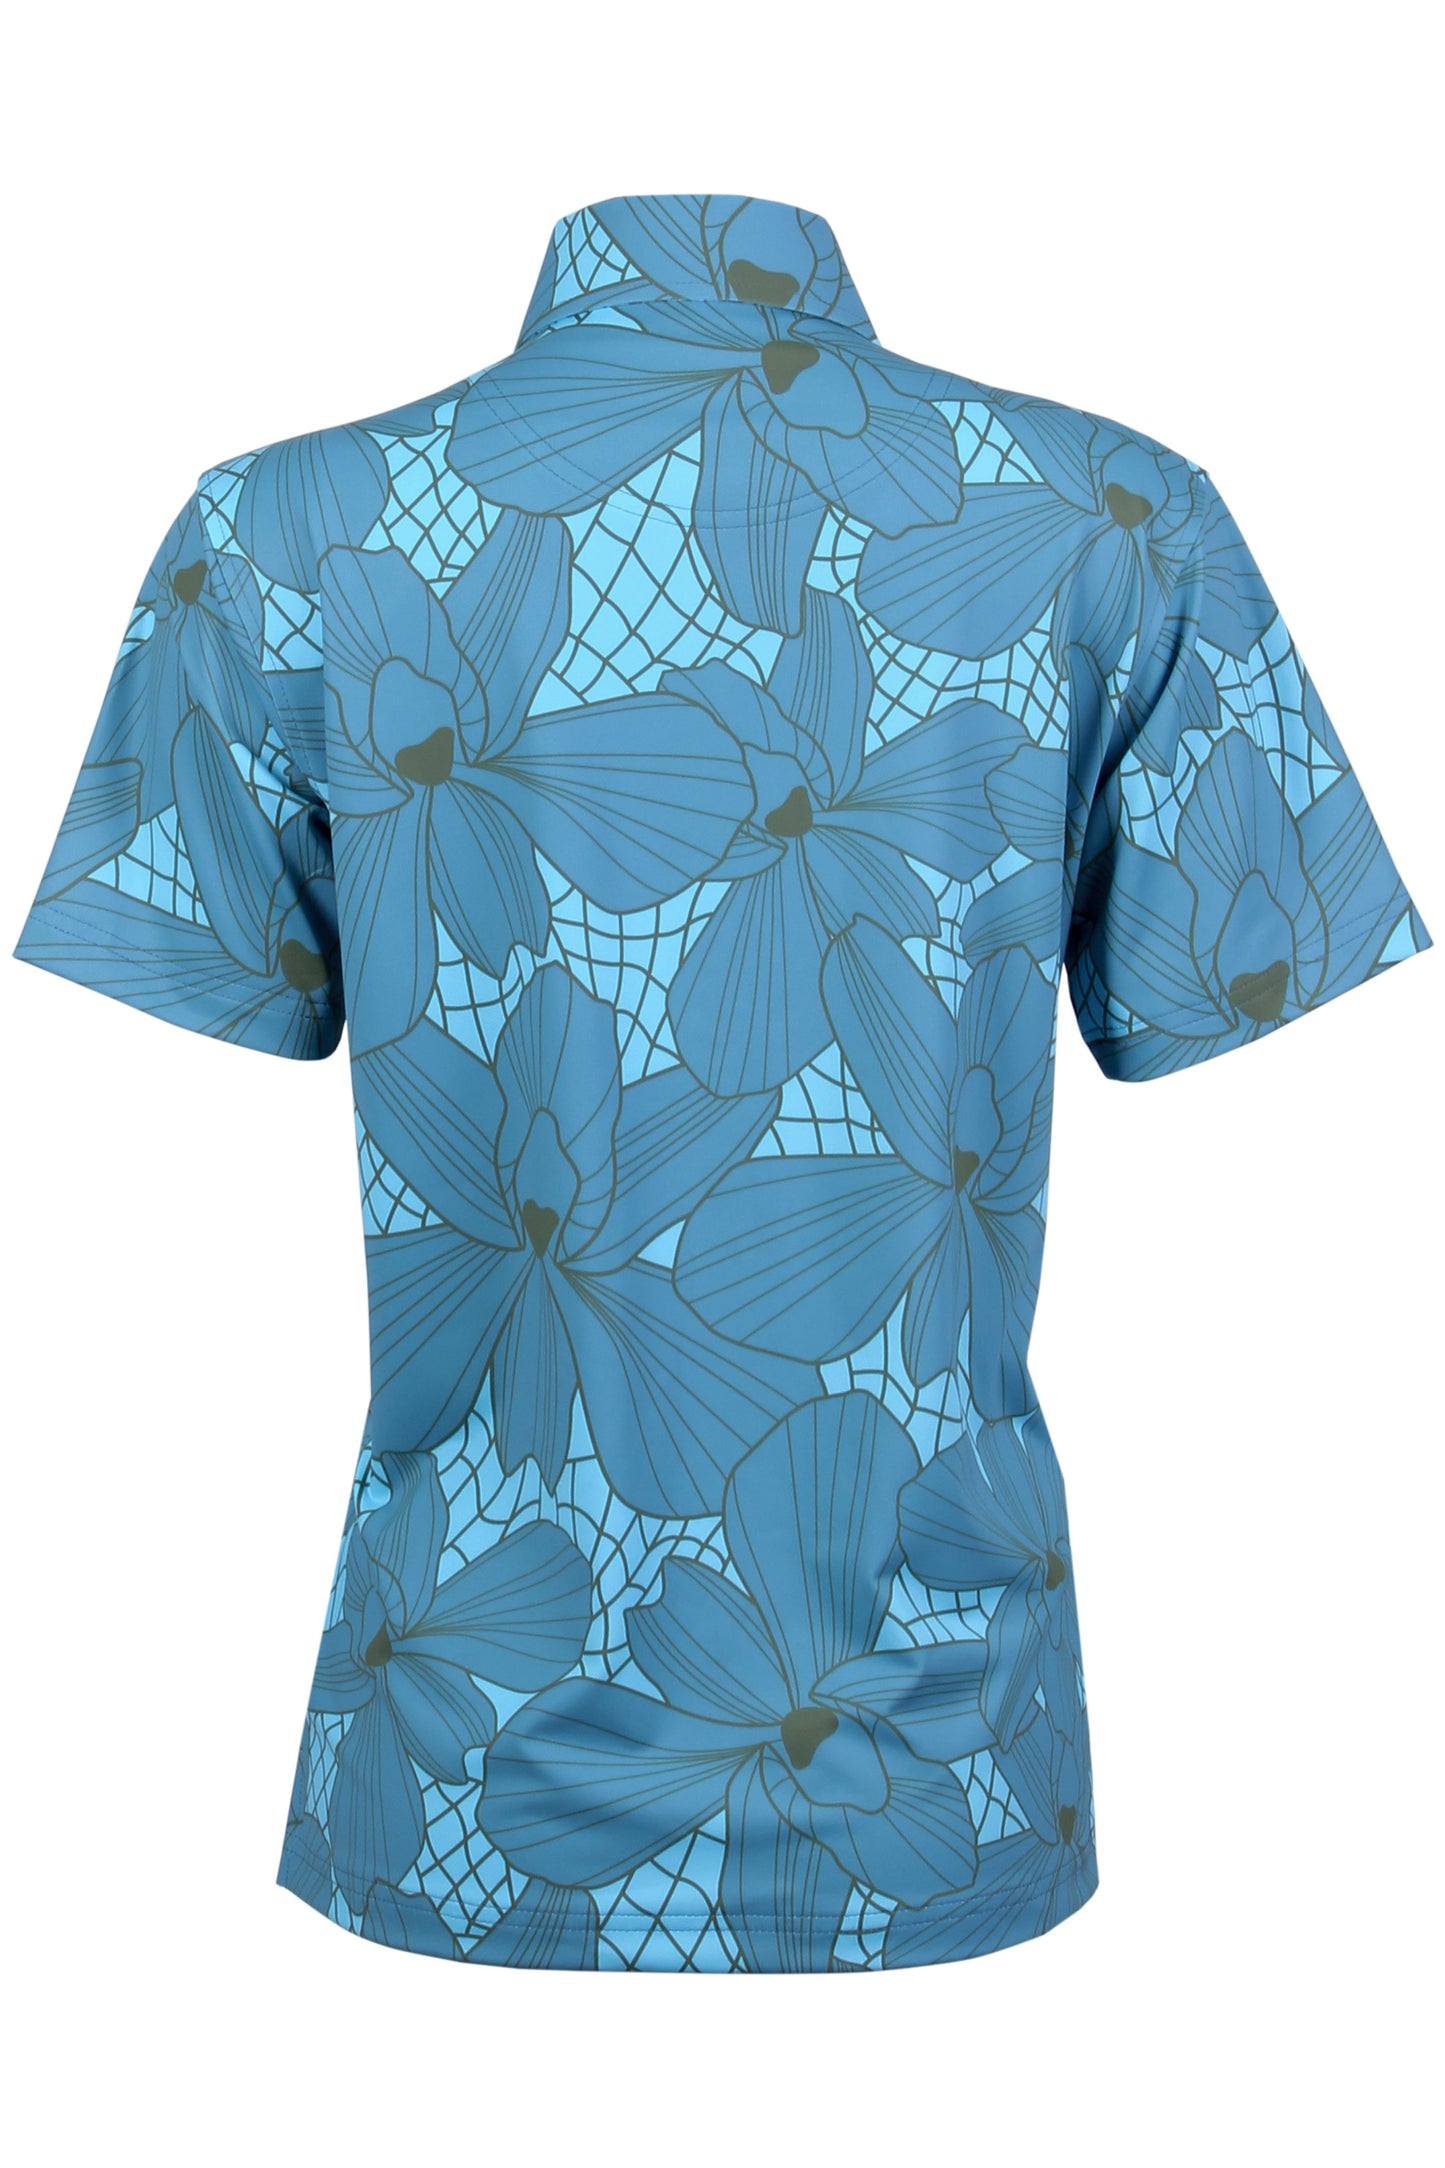 Blue Orchid Polo (Women's)